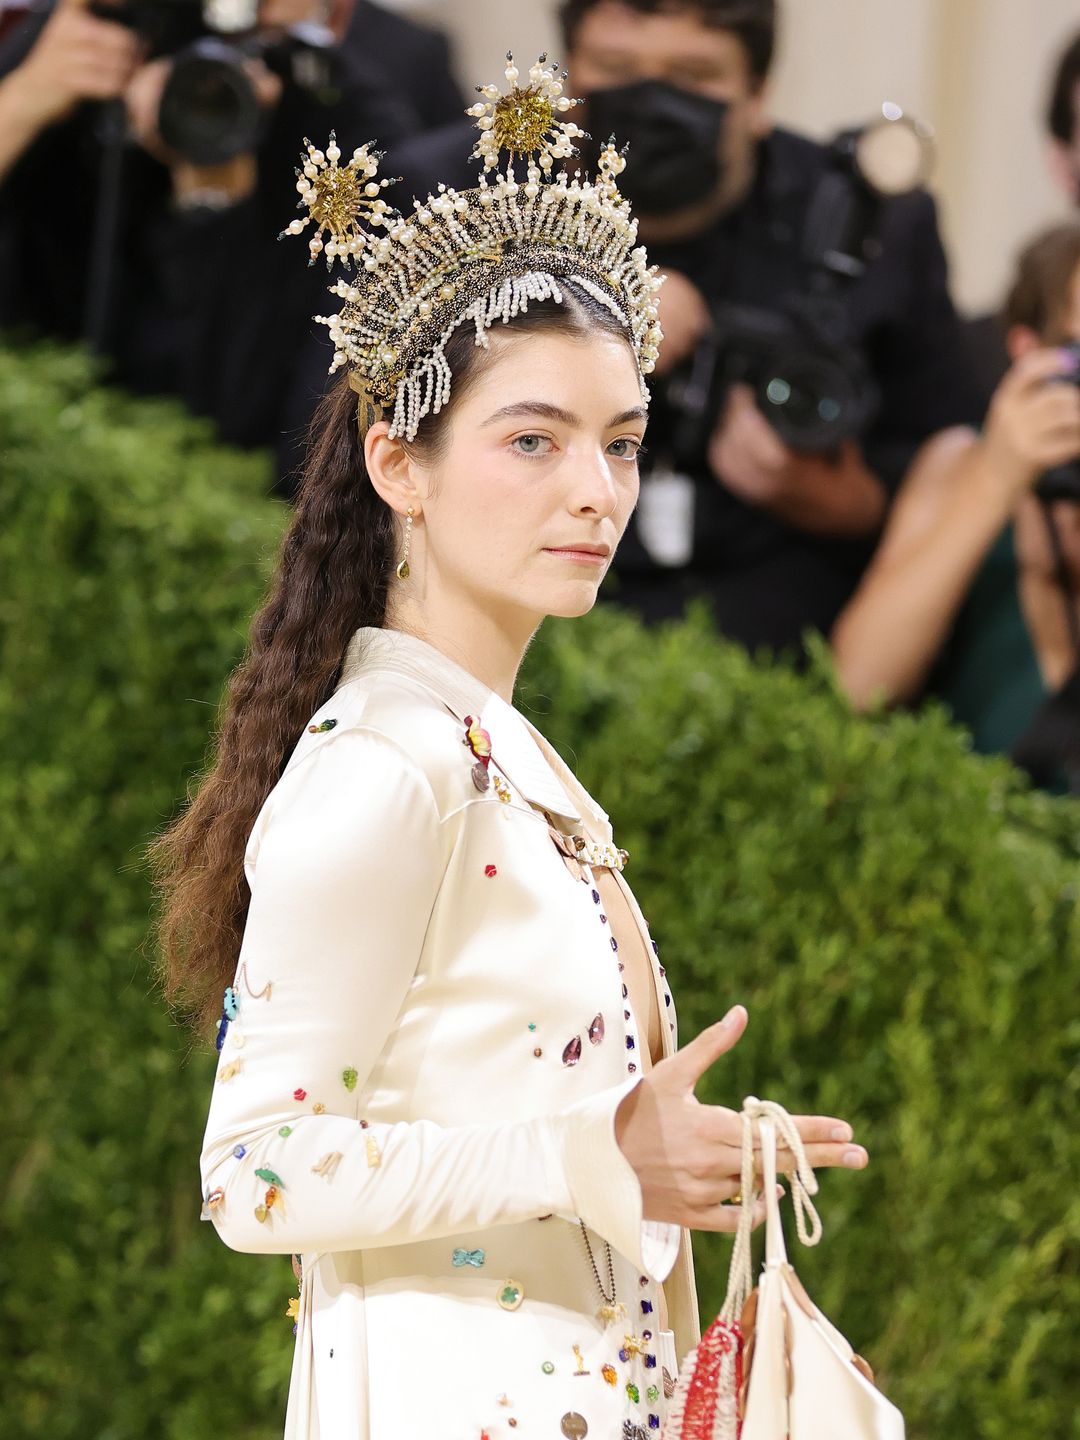 Lorde attends The 2021 Met Gala Celebrating In America: A Lexicon Of Fashion at Metropolitan Museum of Art on September 13, 2021 in New York City